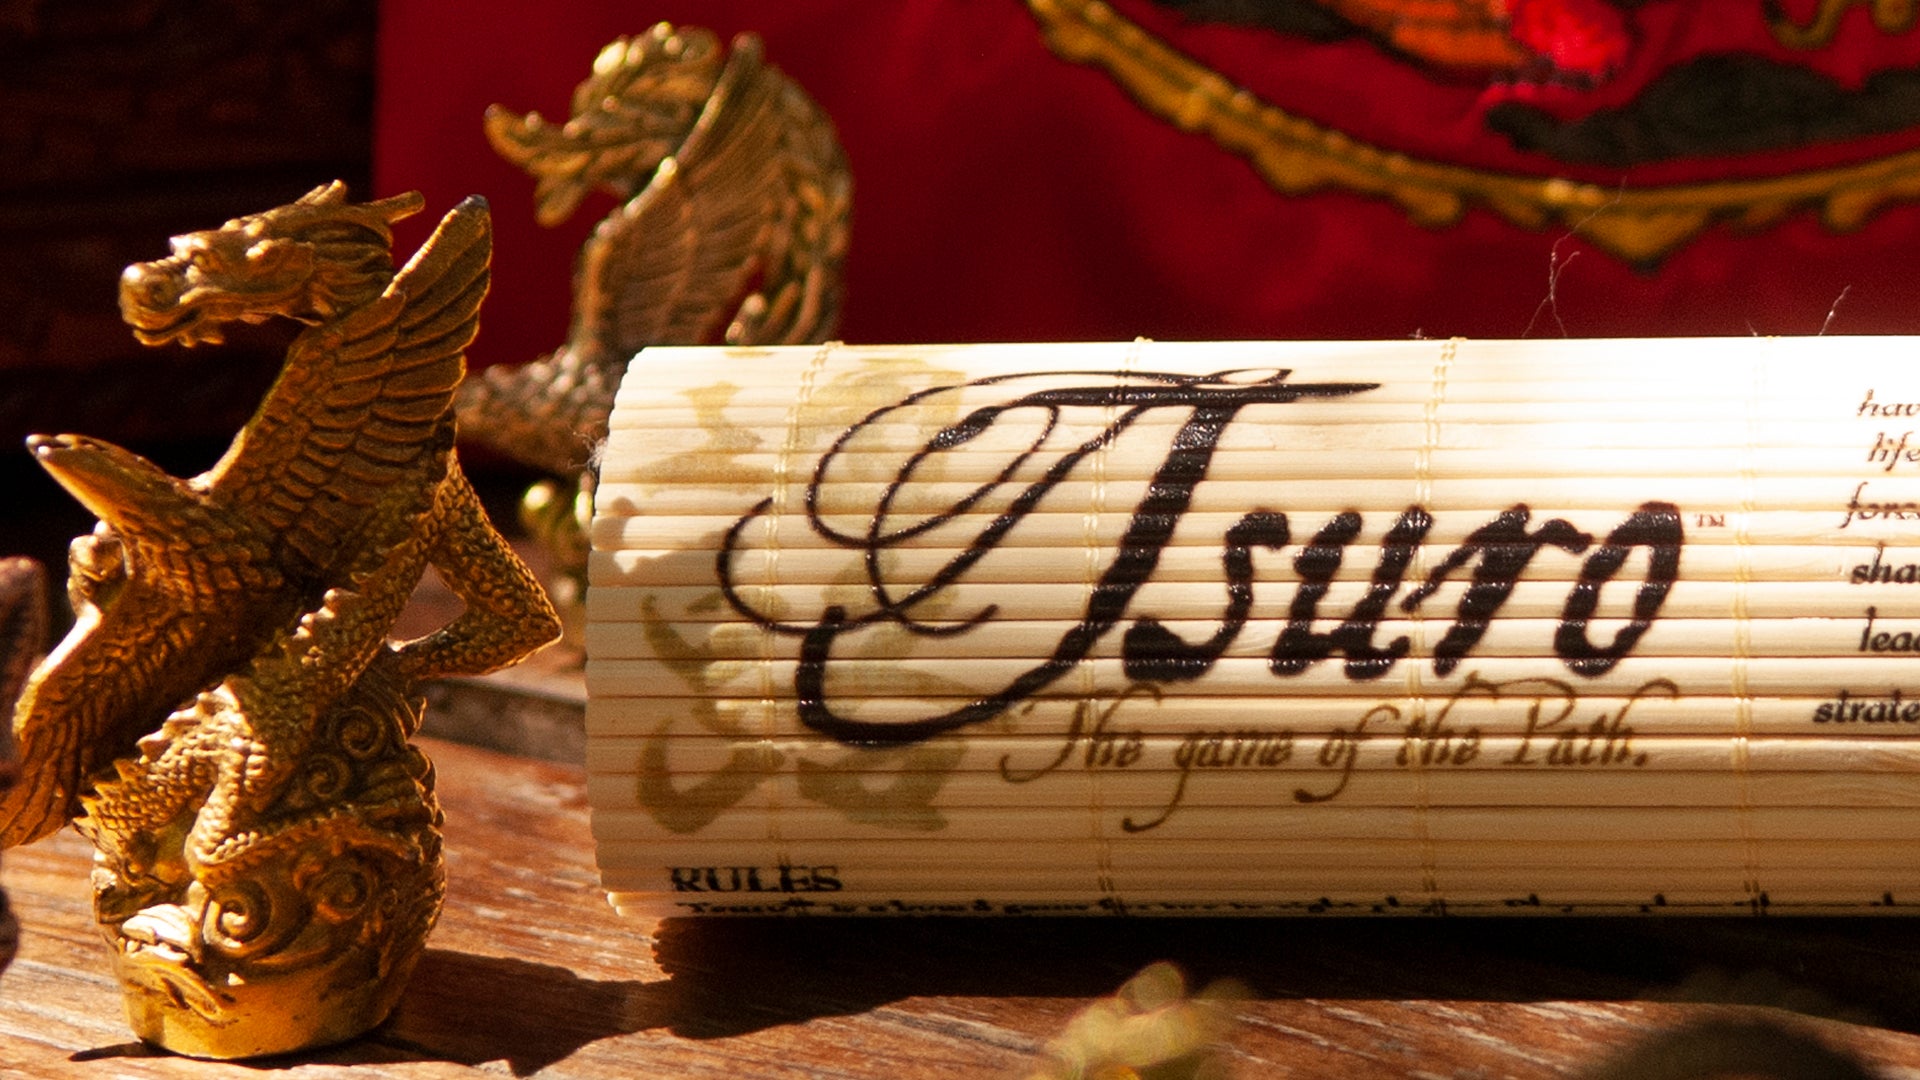 Image for Tsuro’s Luxury Limited Edition costs $350, includes stone tiles, bamboo rules scroll and a gold dragon statue